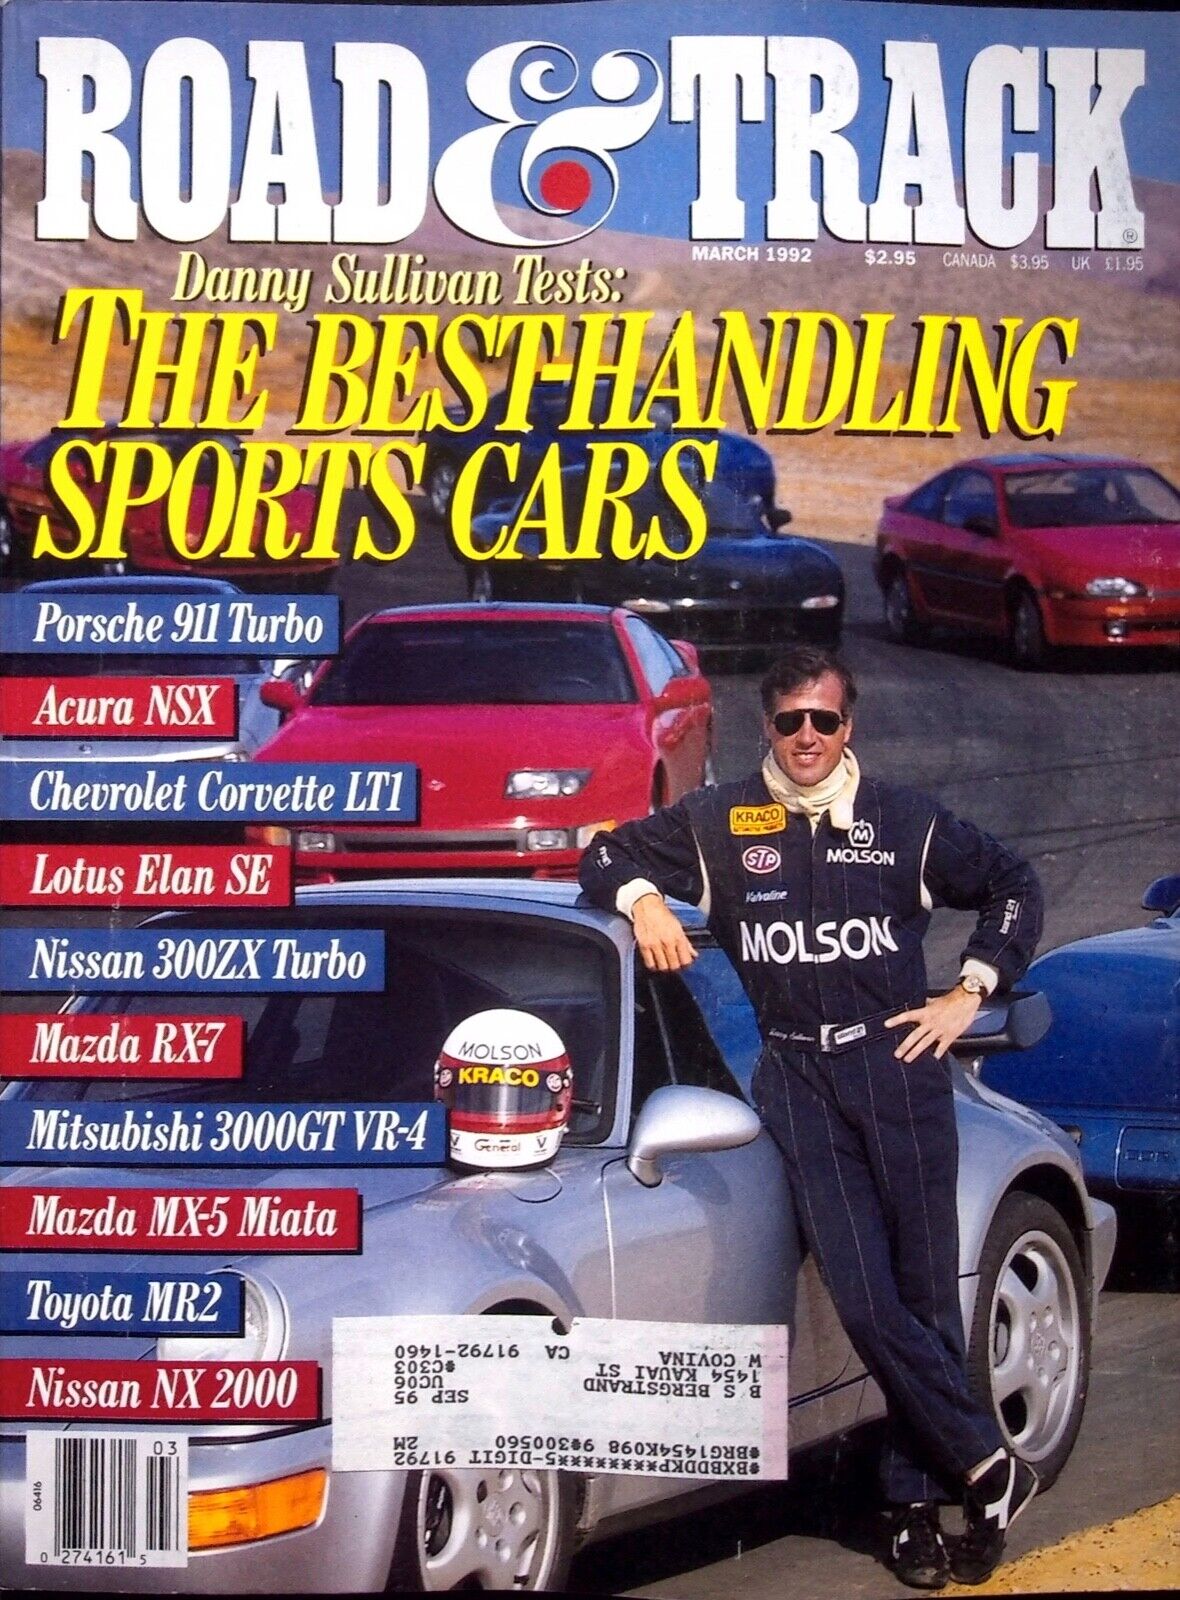 THE BEST HANDLING SPORTS CAR - ROAD & TRACK MAGAZINE, MARCH 1992 VO. 43, NO. 7 